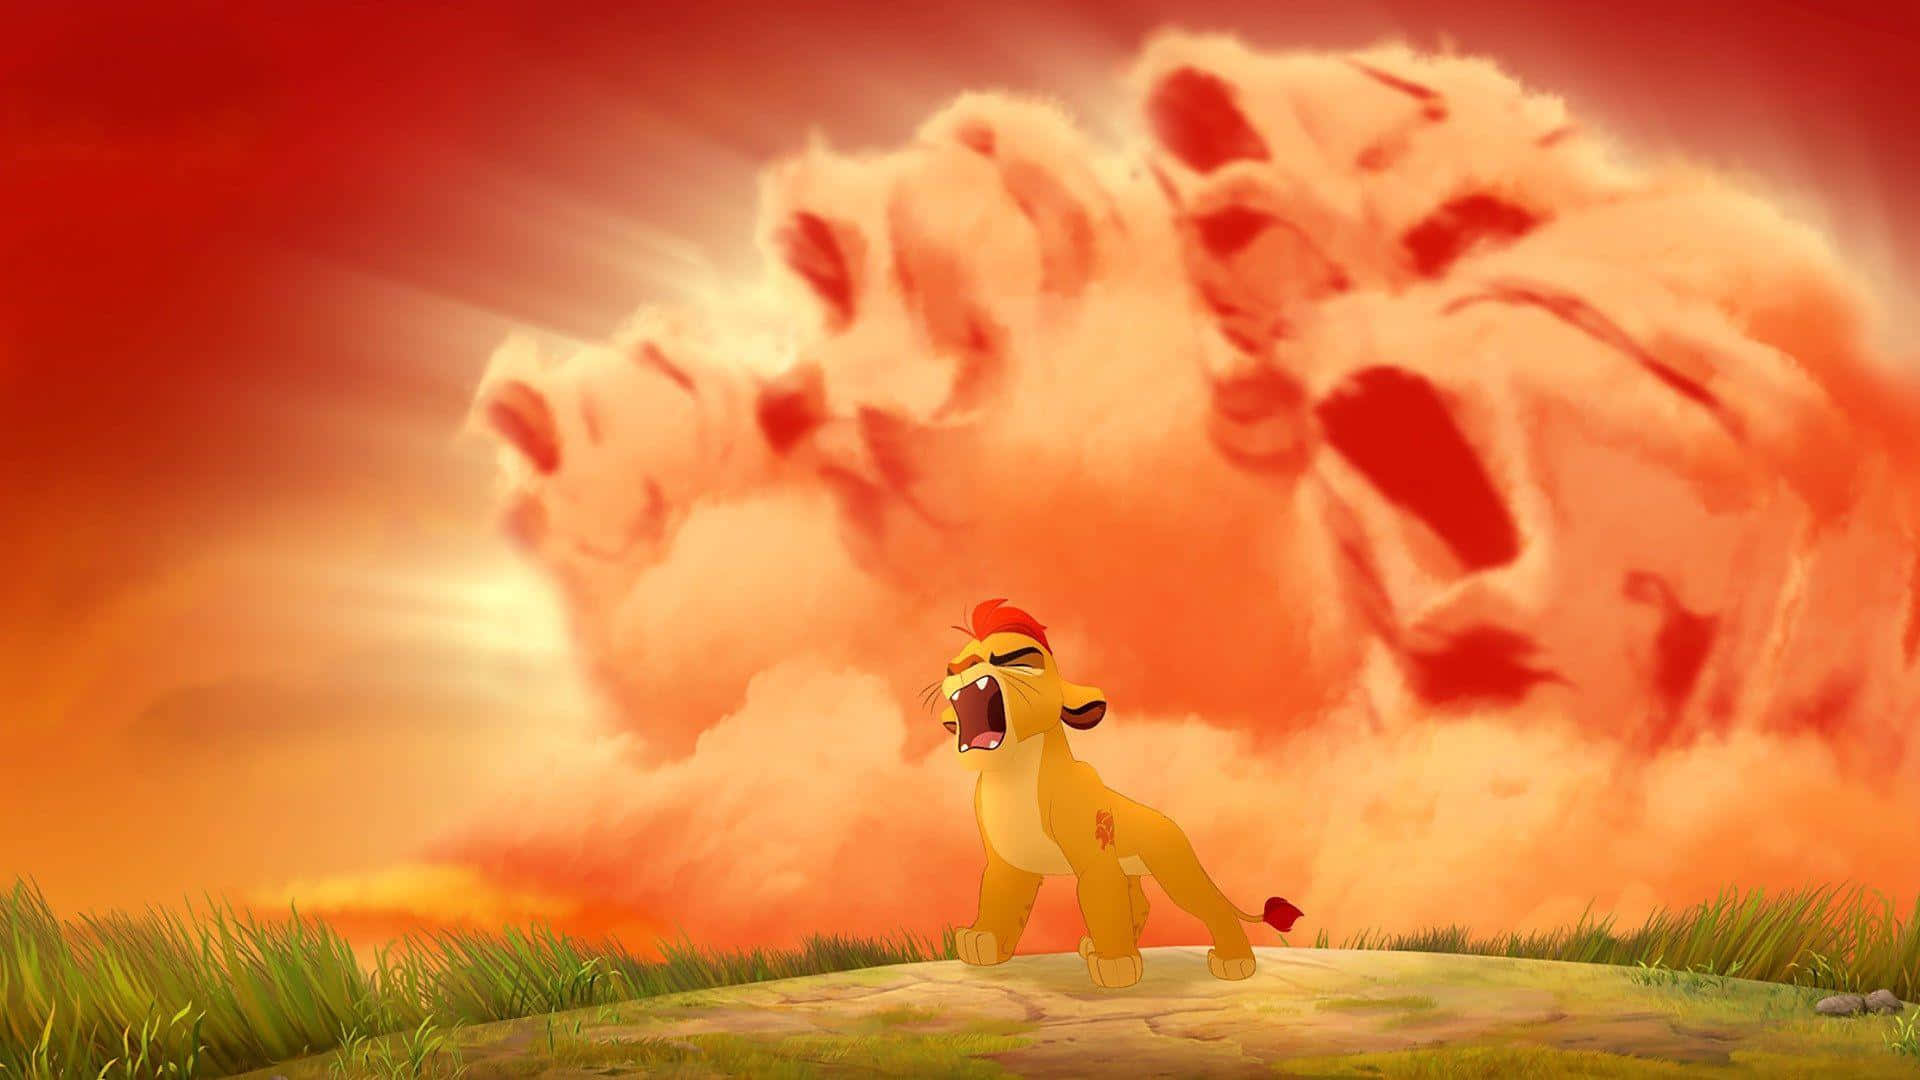 The Lion Guard - Protectors of the Pridelands Wallpaper